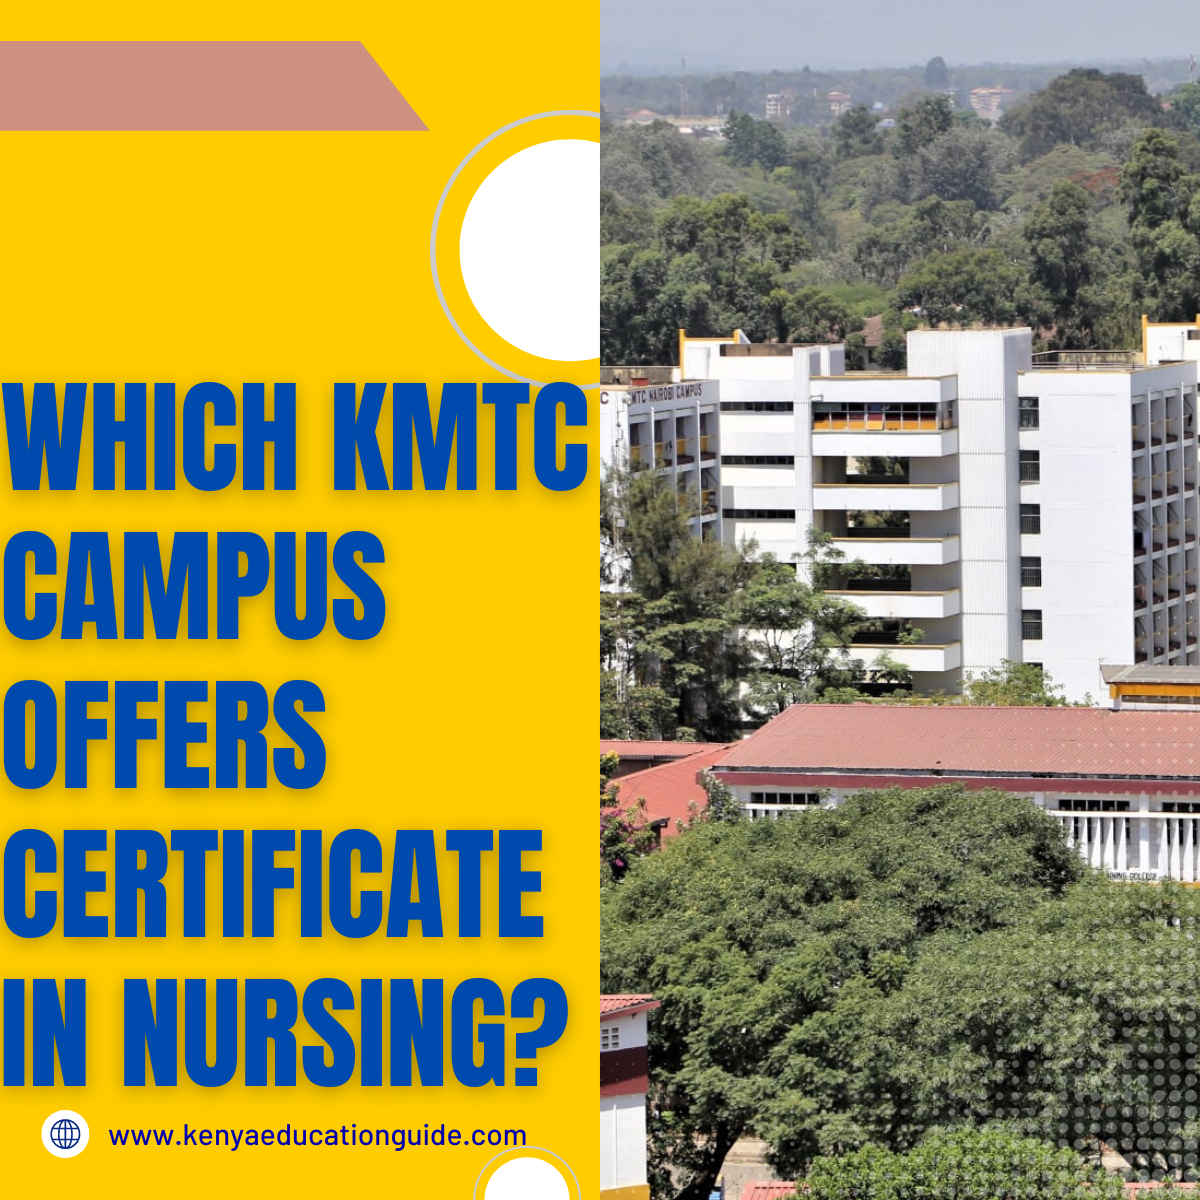 Which KMTC campus offers certificate in nursing